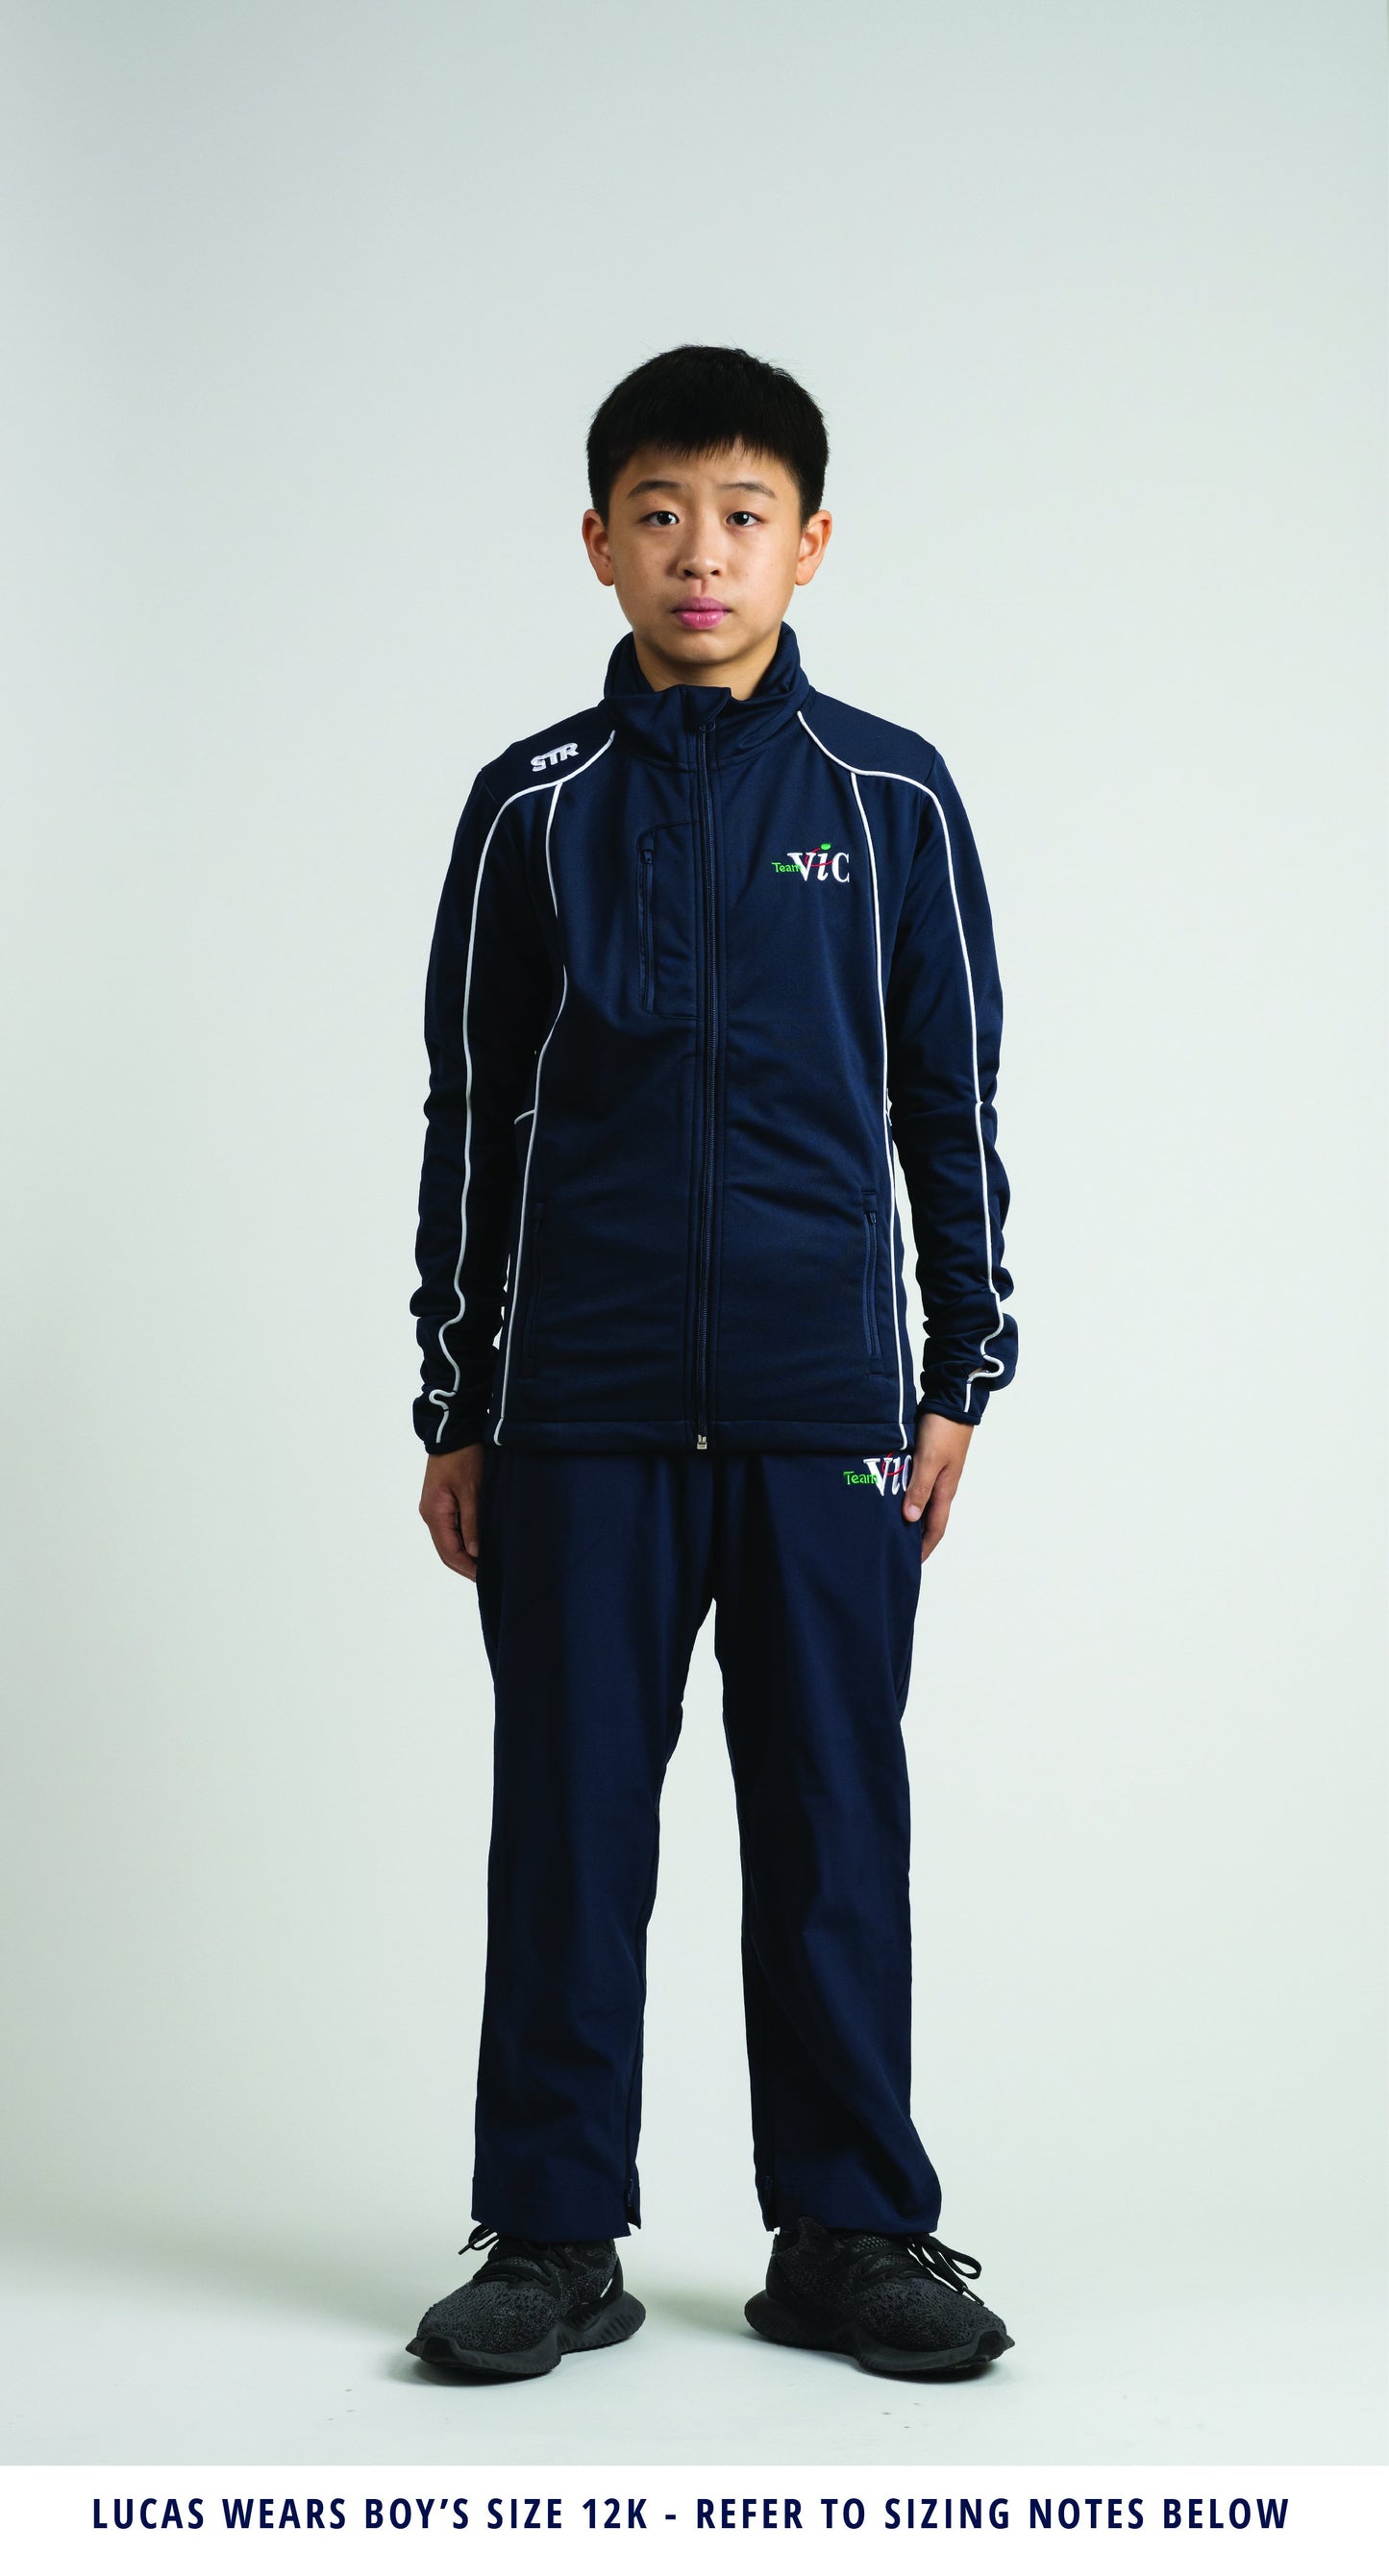 Male Team Vic FlexDry Track Jacket (2022  Run Out Stock)